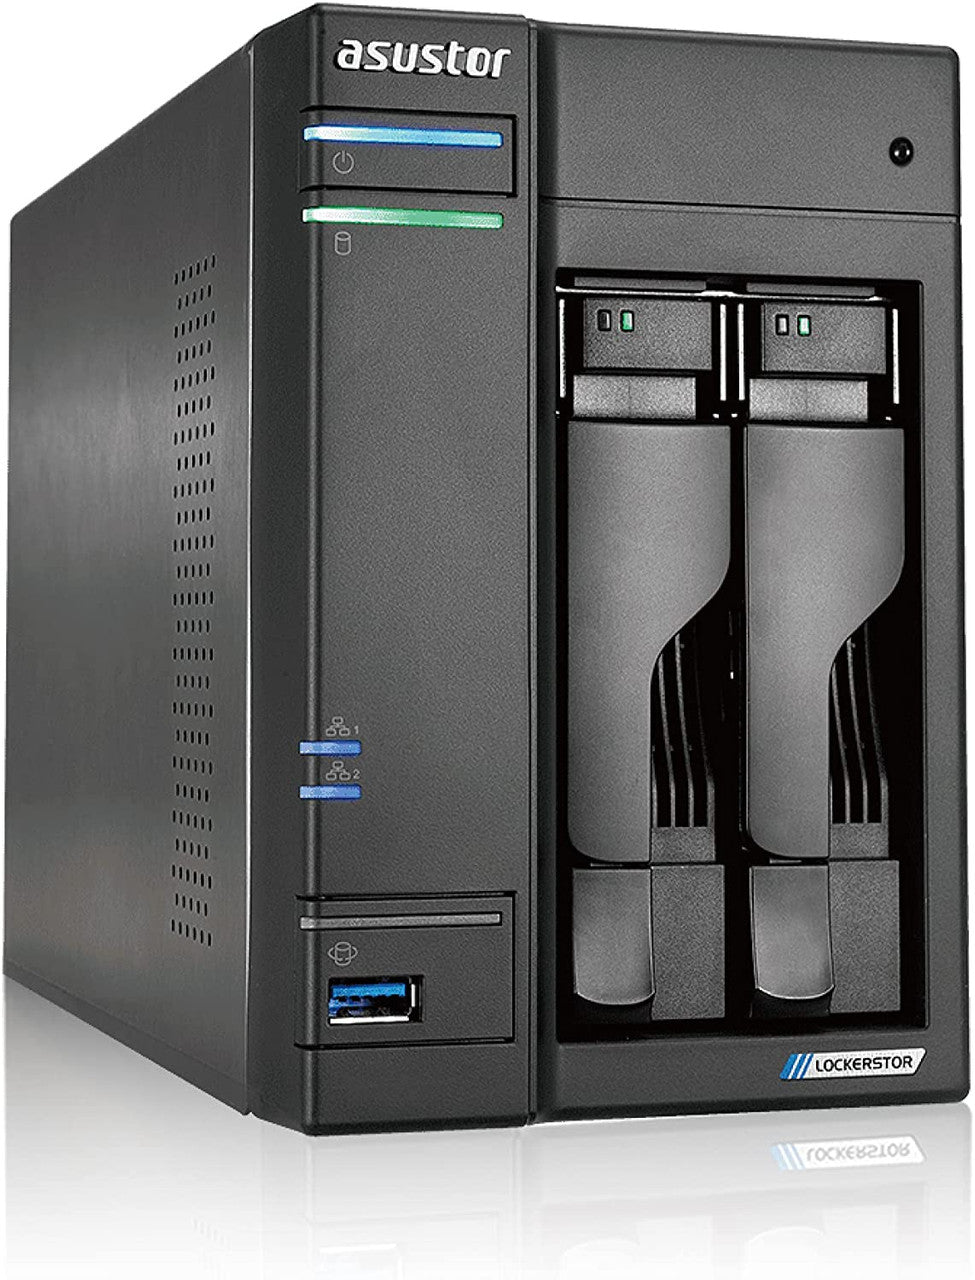 Asustor AS6602T 2-Bay Lockerstor 2 NAS with 4GB RAM and 16TB (2x8TB) Seagate Ironwolf PRO Drives